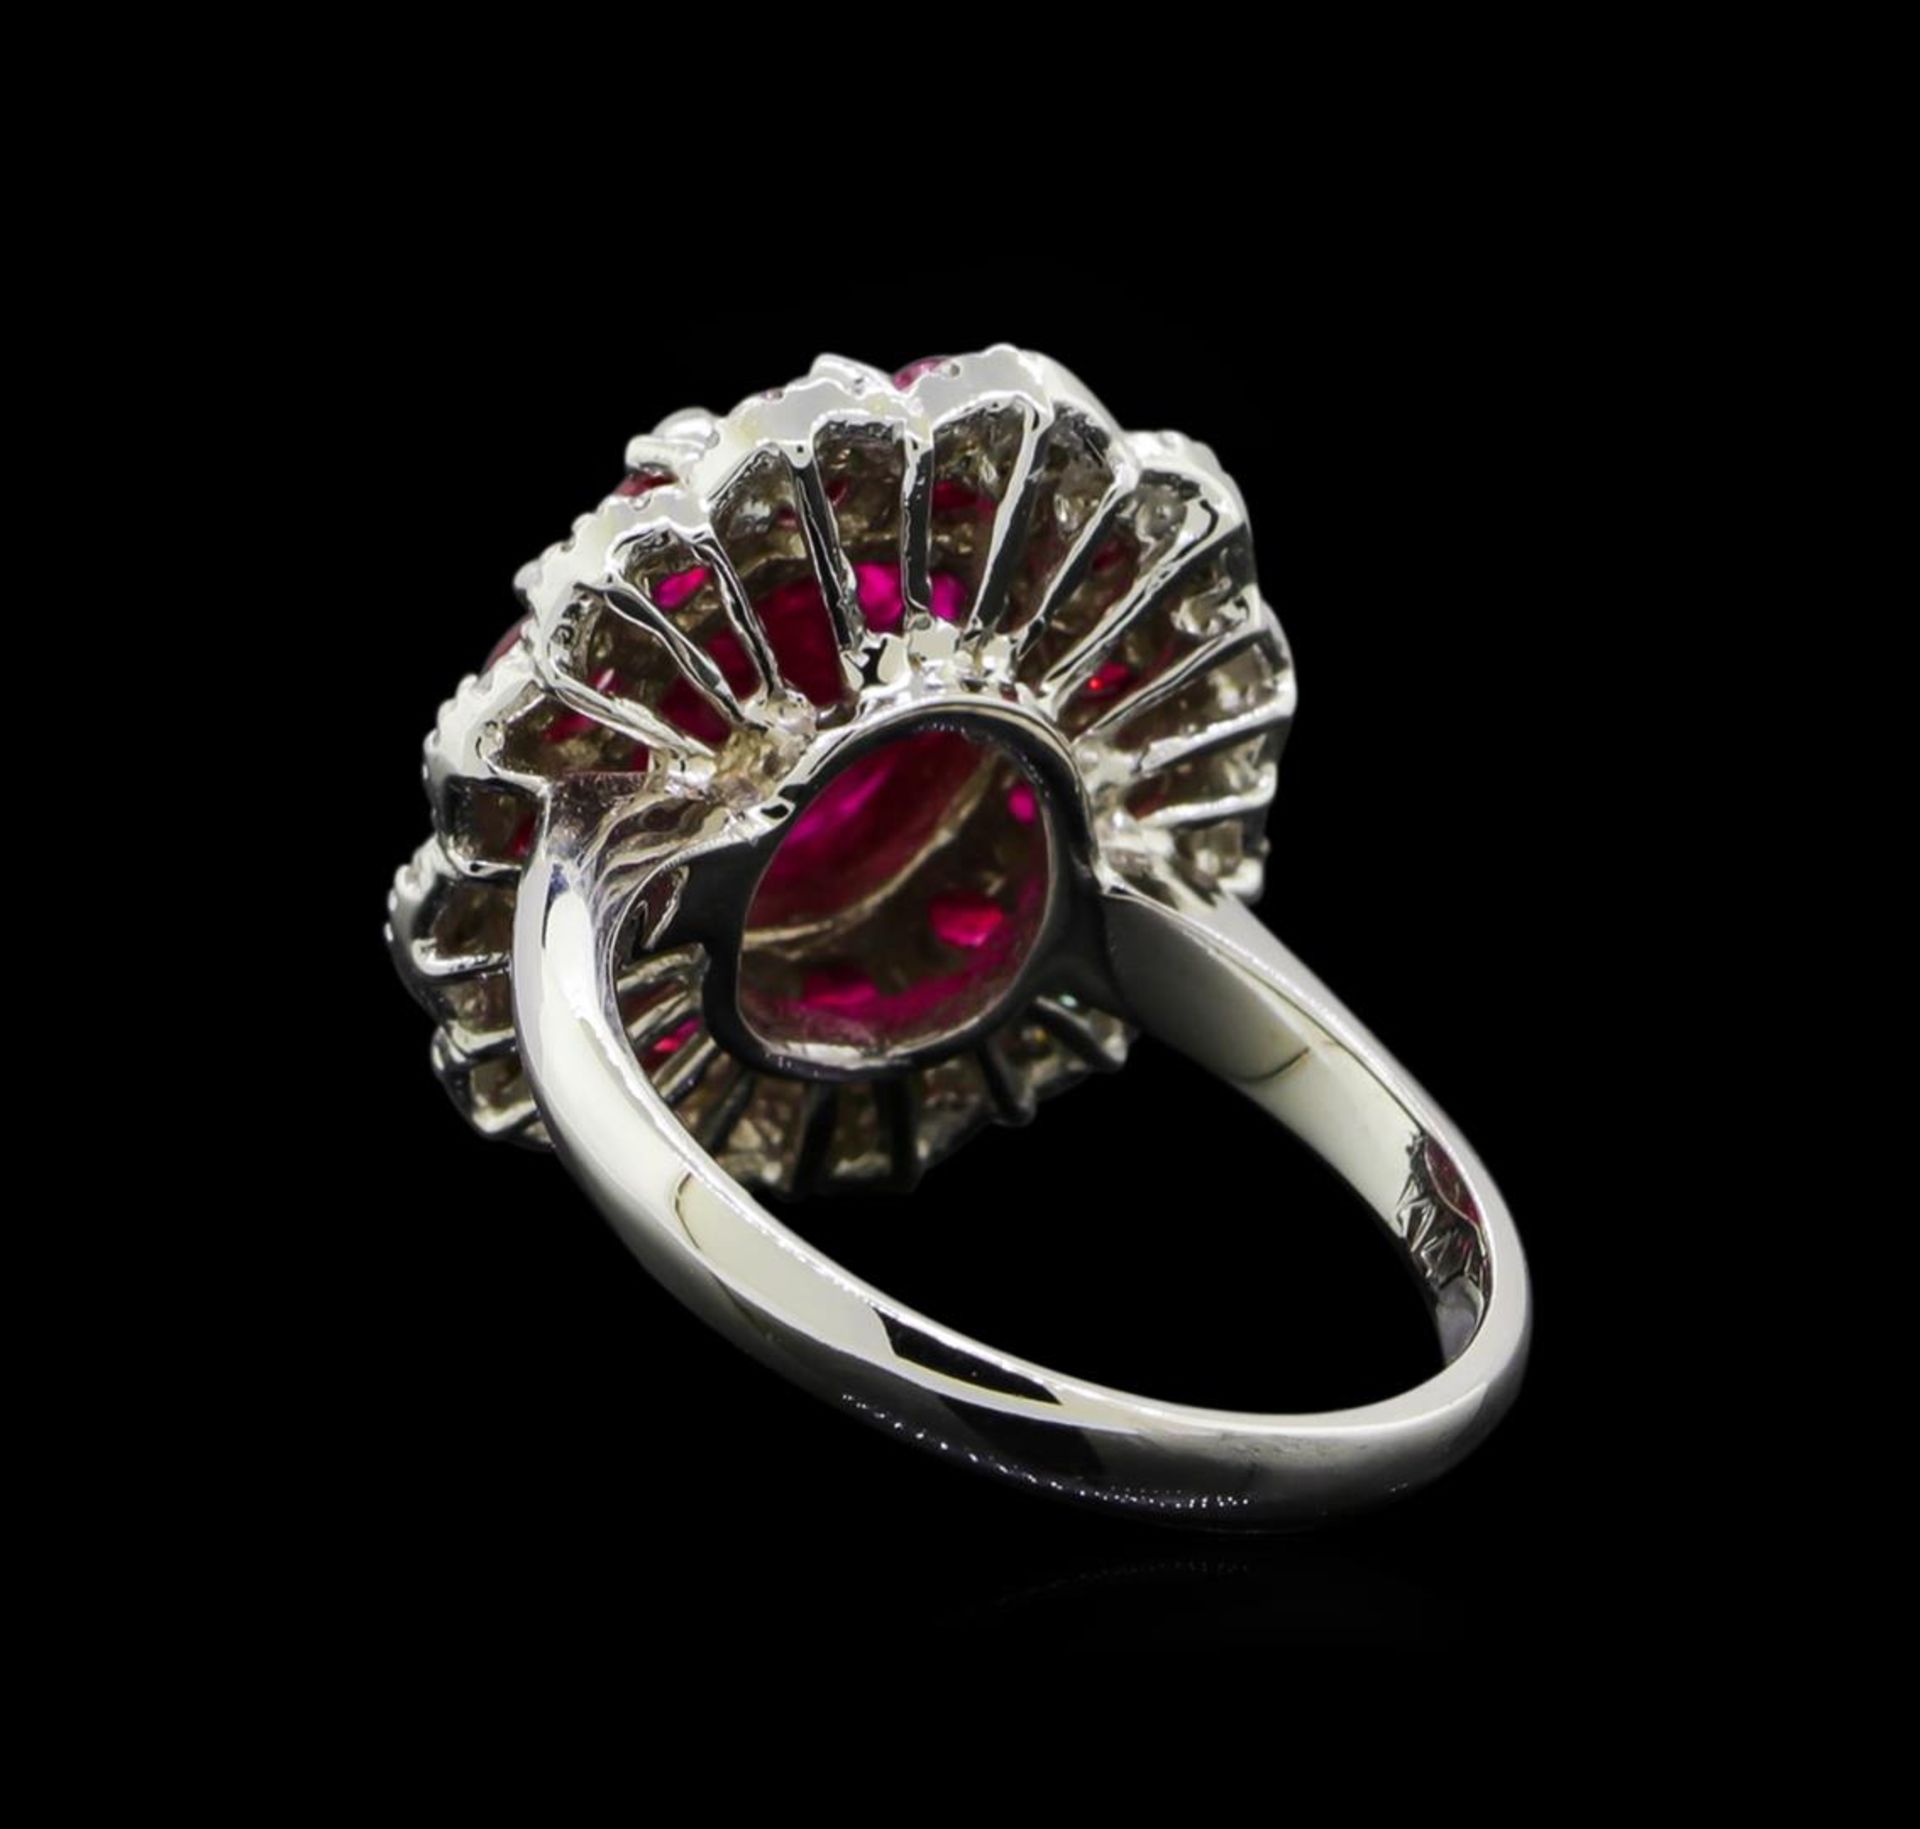 GIA Cert 4.54 ctw Ruby and Diamond Ring - 14KT White Gold - Image 3 of 6